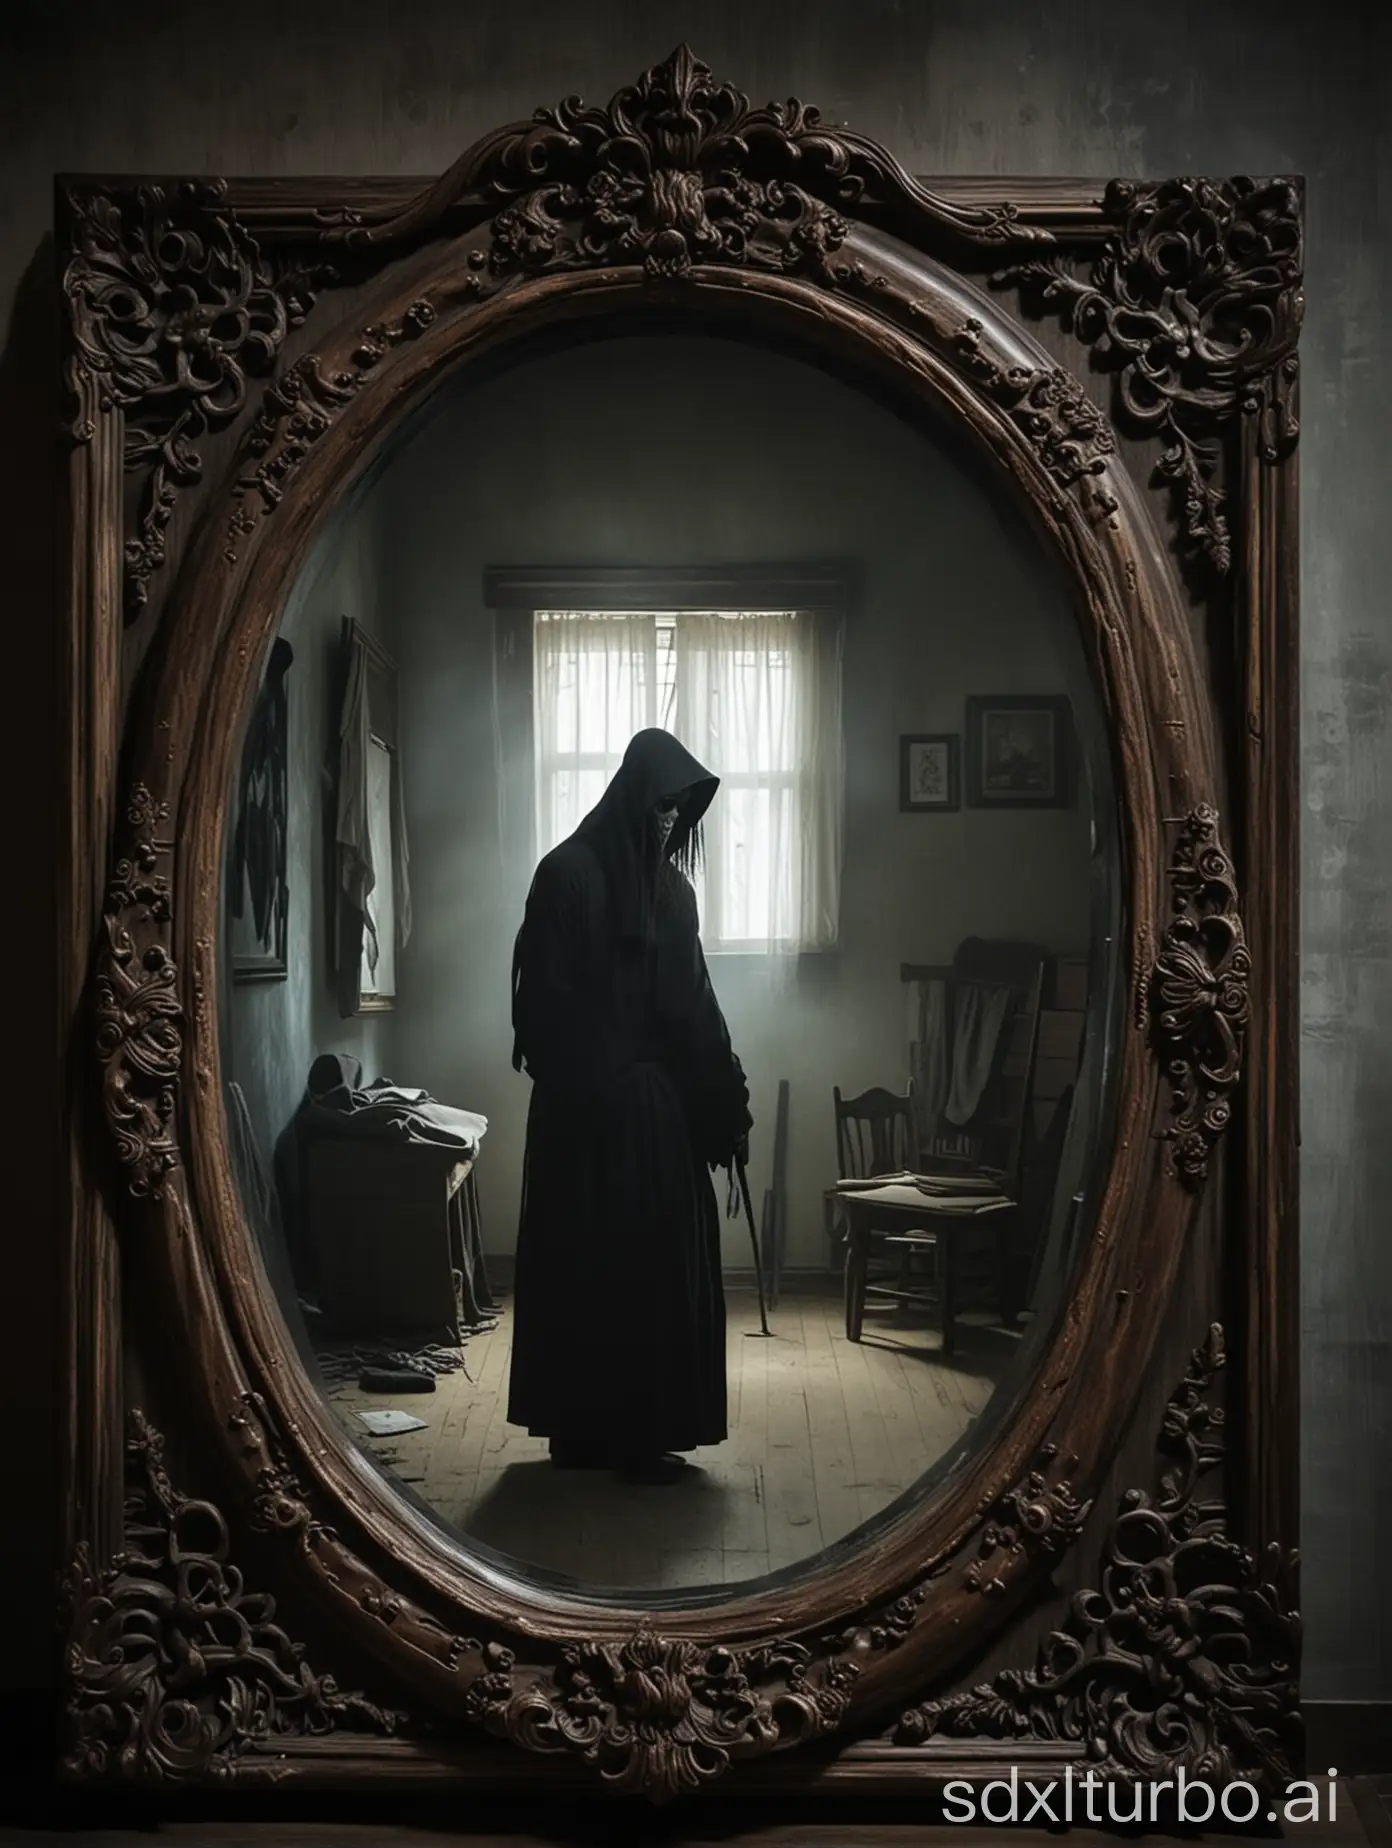 The eerie and mysterious atmosphere of the Korean Grim Reaper reflected in the mirror